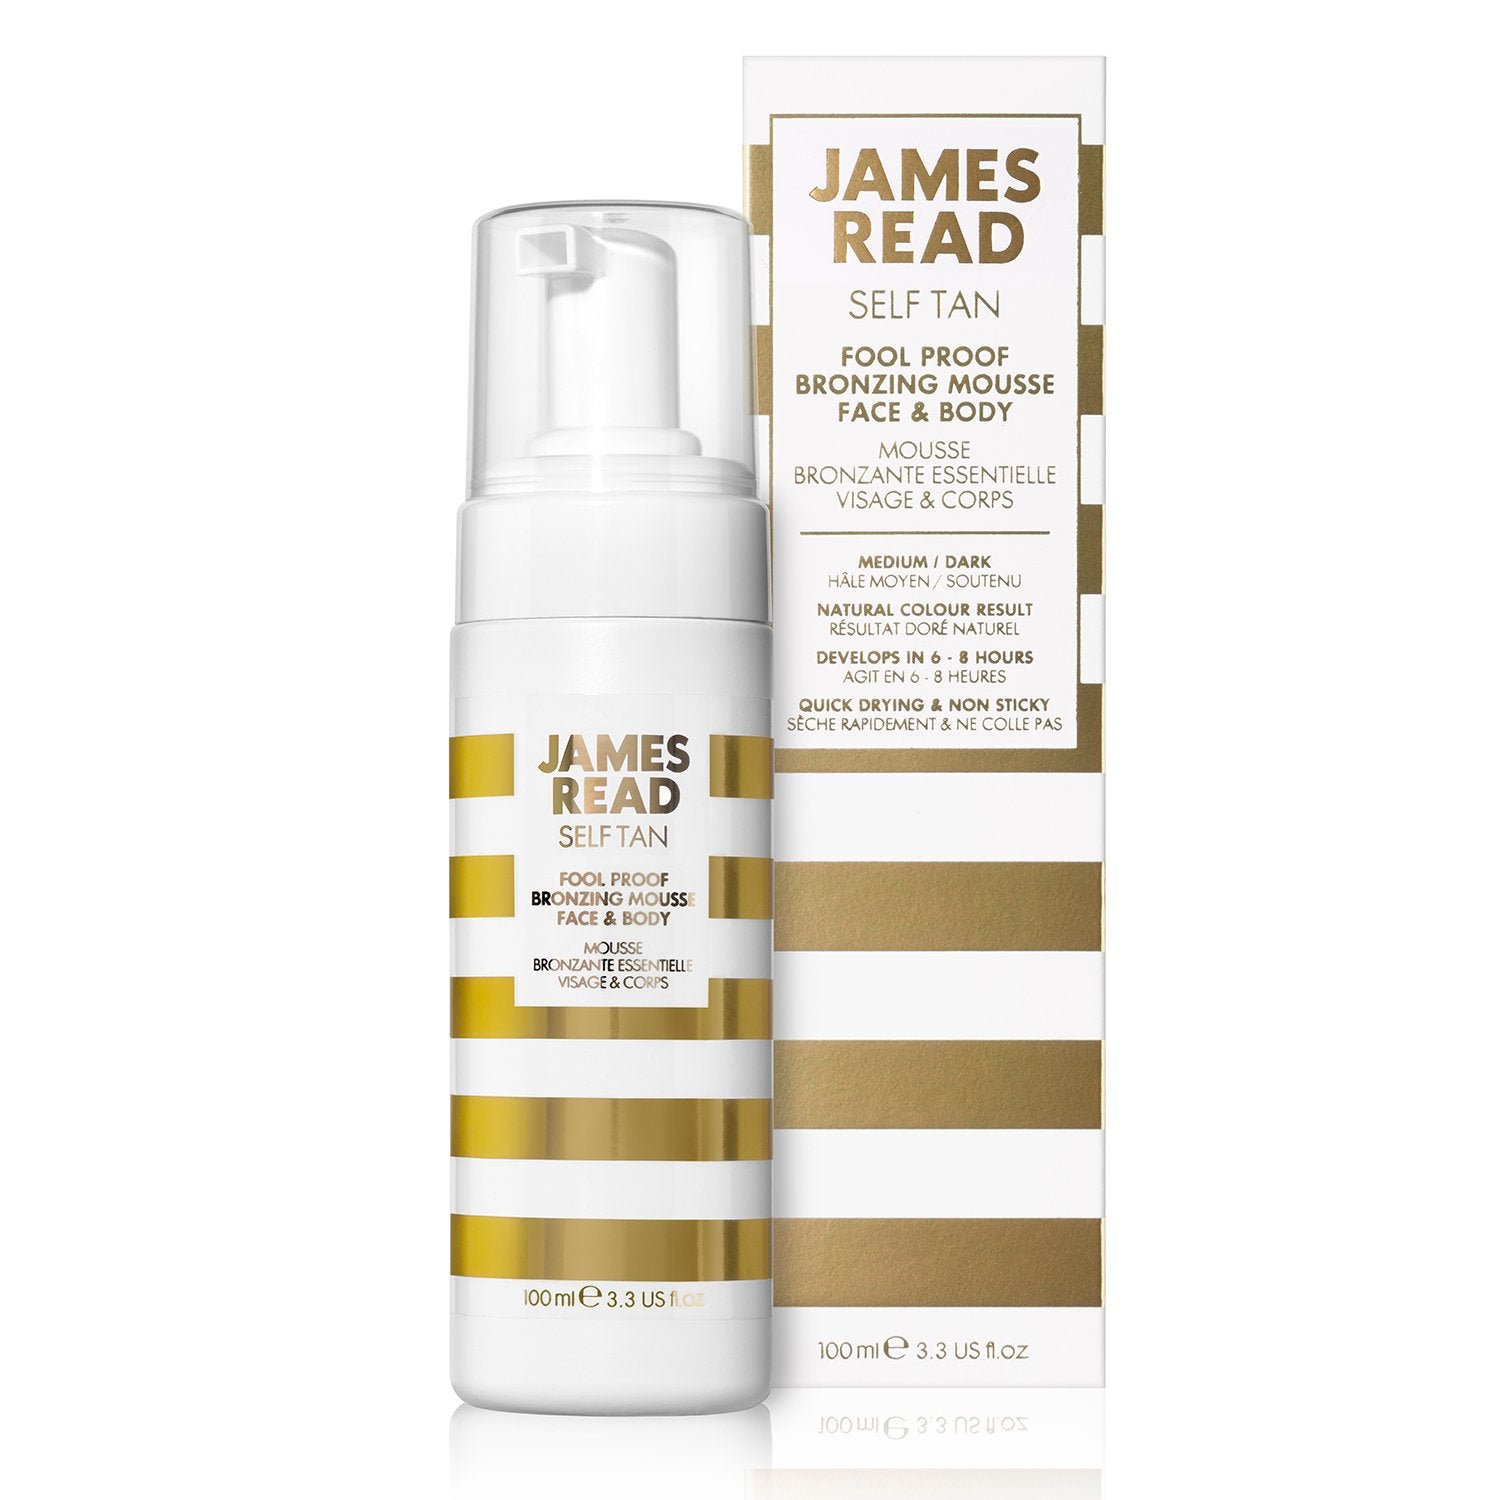 James Read Fool Proof Bronzing Mousse for Face and Body